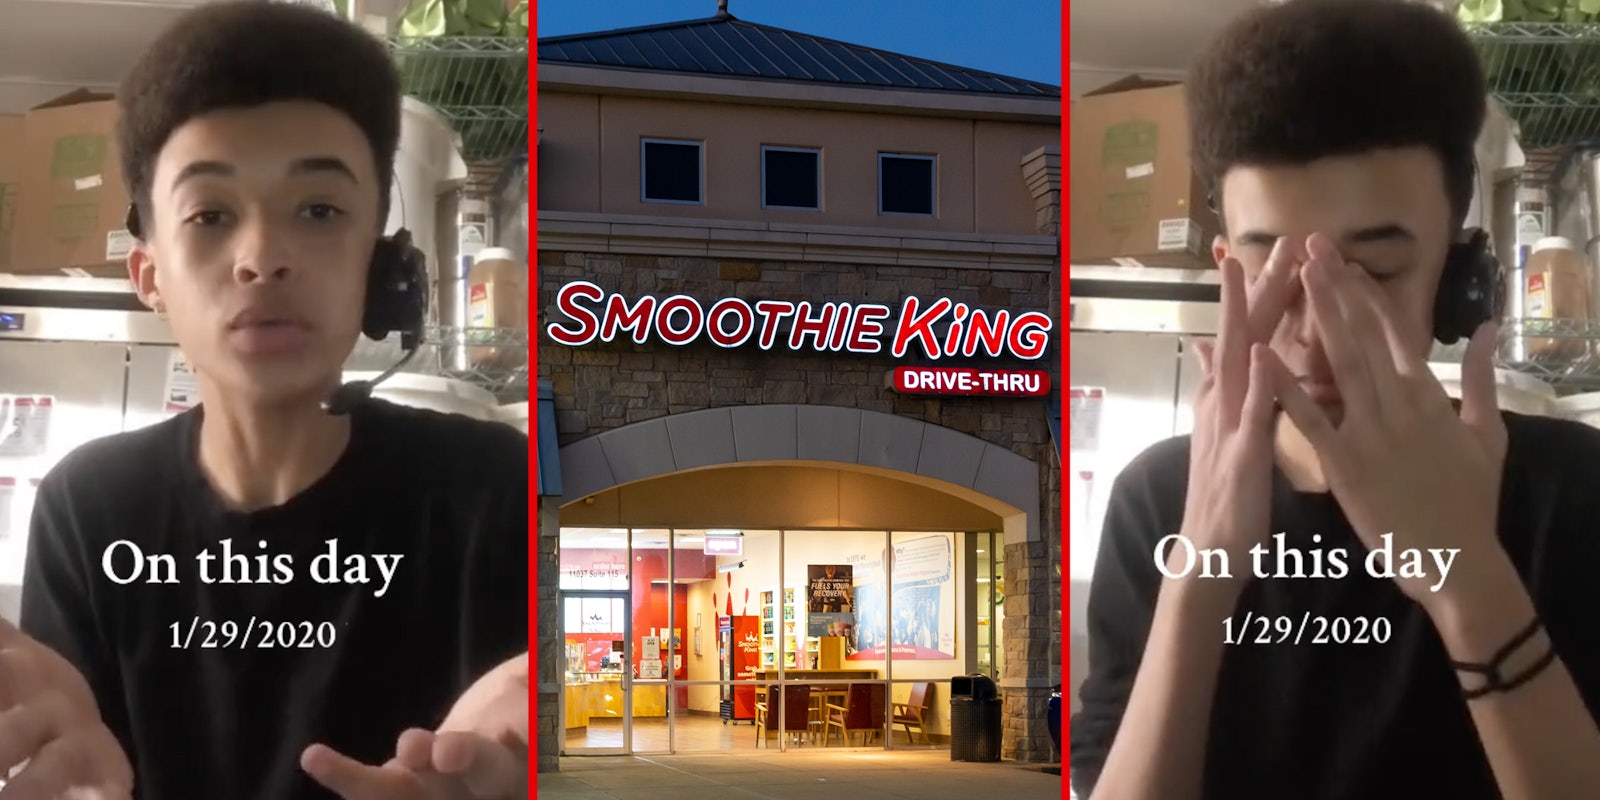 Person talking(l), Smoothie King storefront(c), Person with their hands on their face(r)